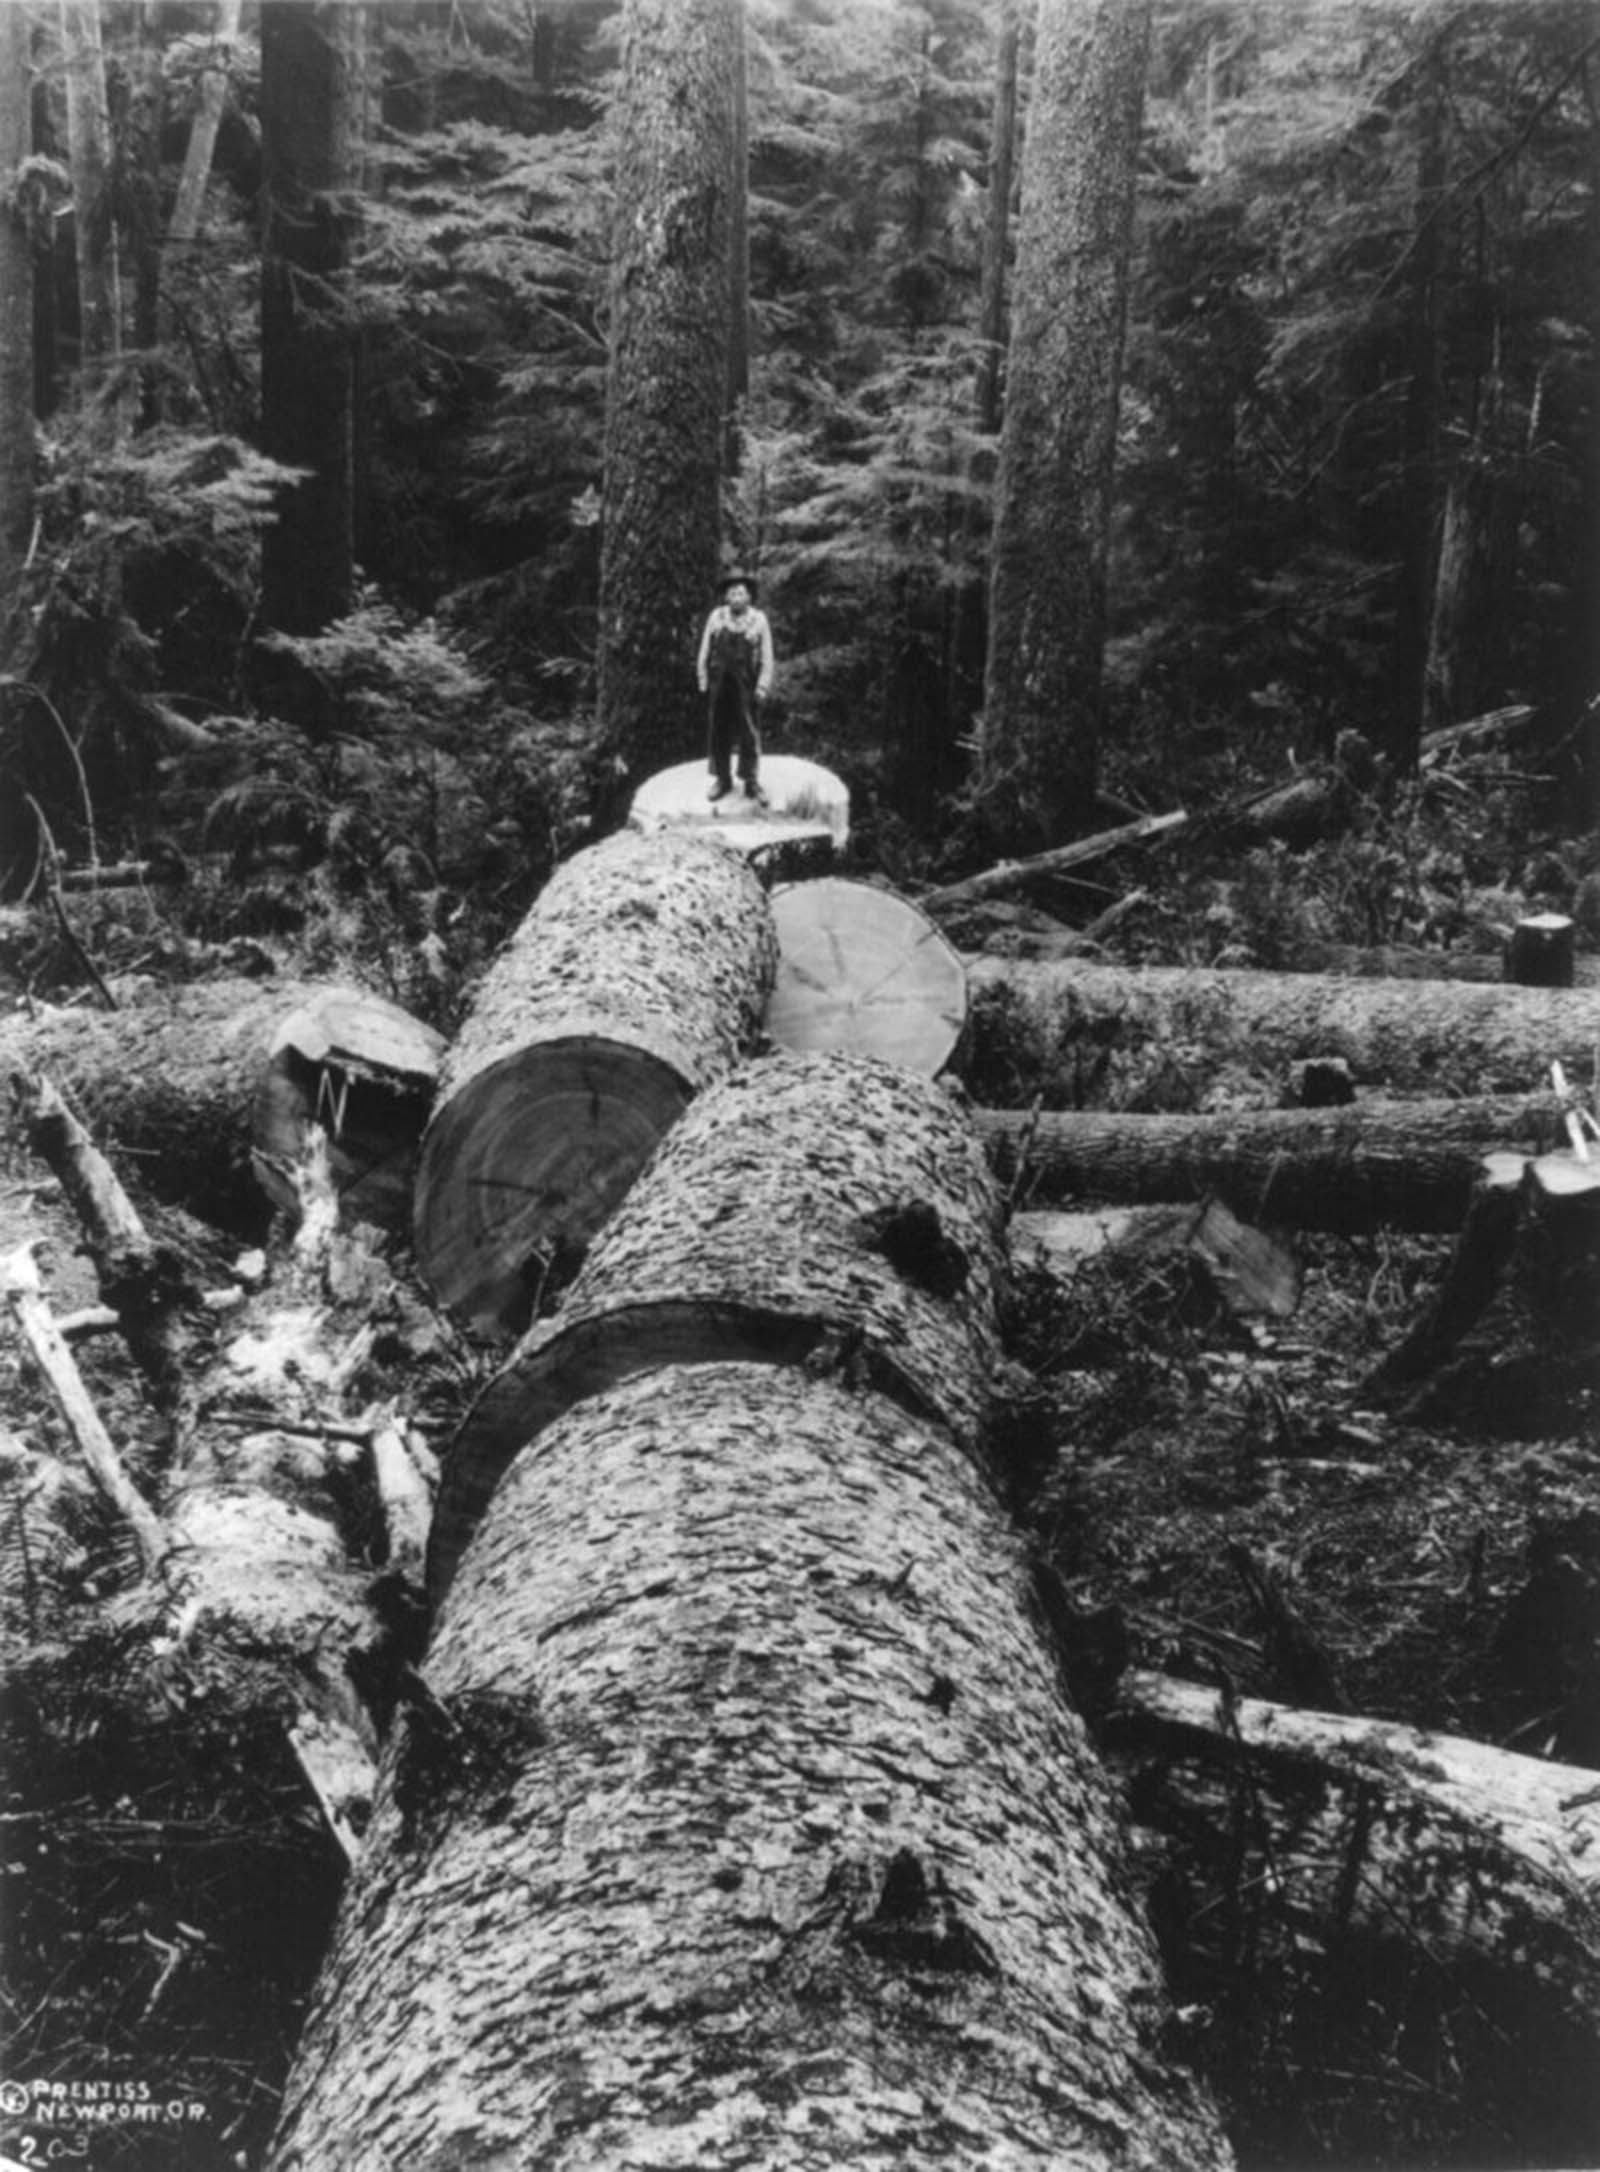 A lumberjack stands on a felled spruce tree, 1918.